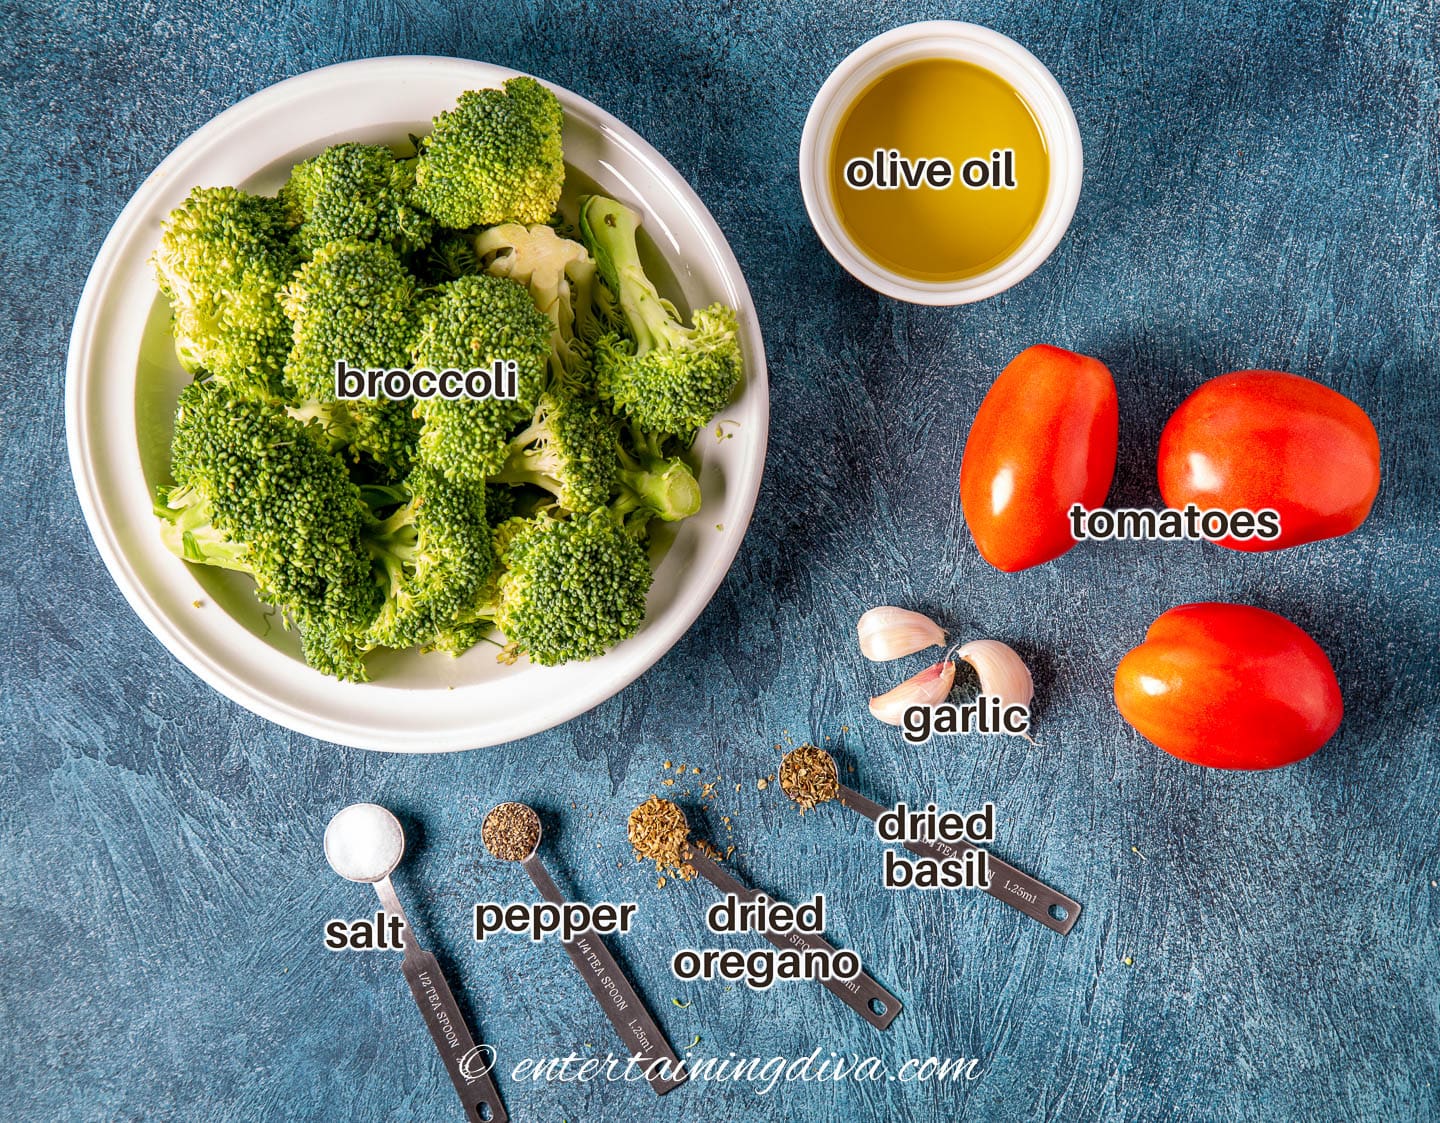 microwaved broccoli and tomatoes ingredients - broccoli, olive oil, tomatoes, garlic, dried basil, dried oregano, salt, pepper